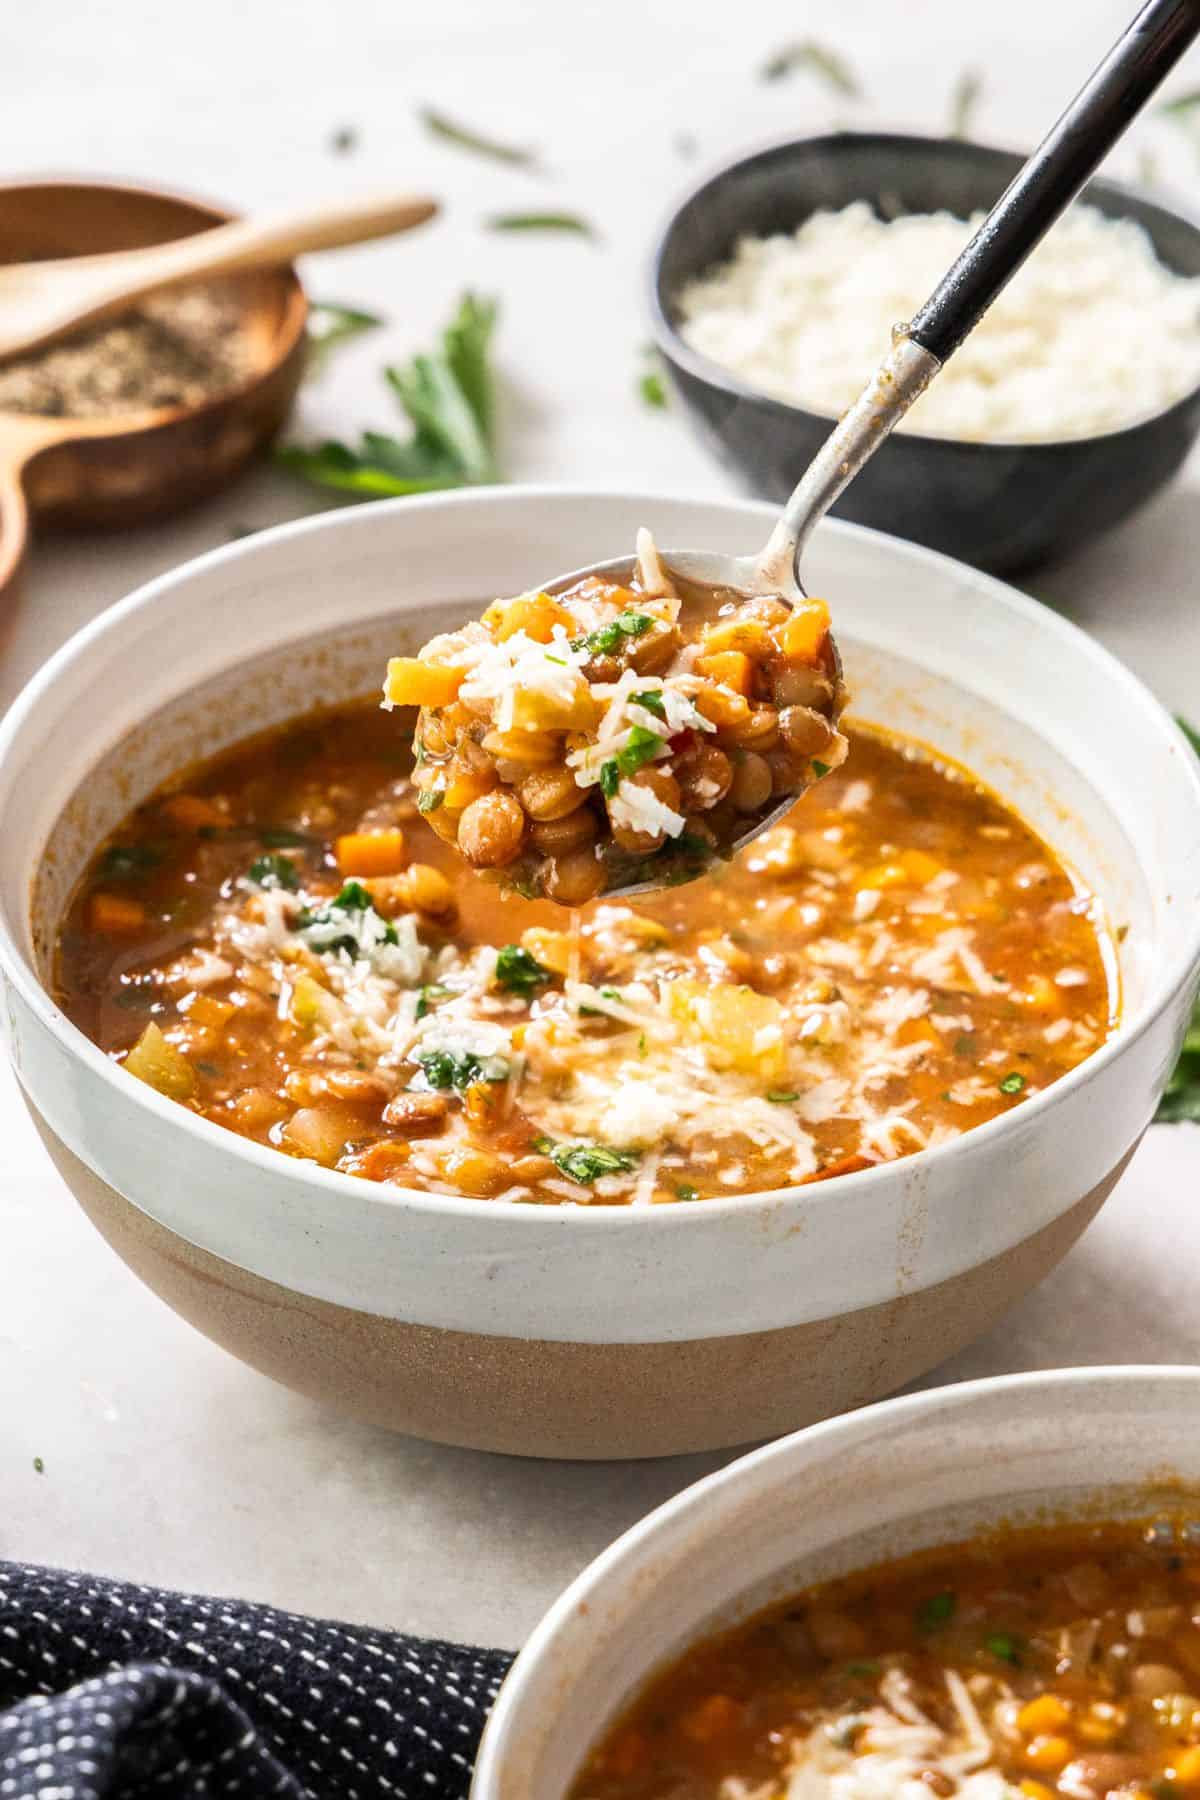 Serve of Lentil Soup in a round white and brown bowl, with a spoon scooping up a mouthful.